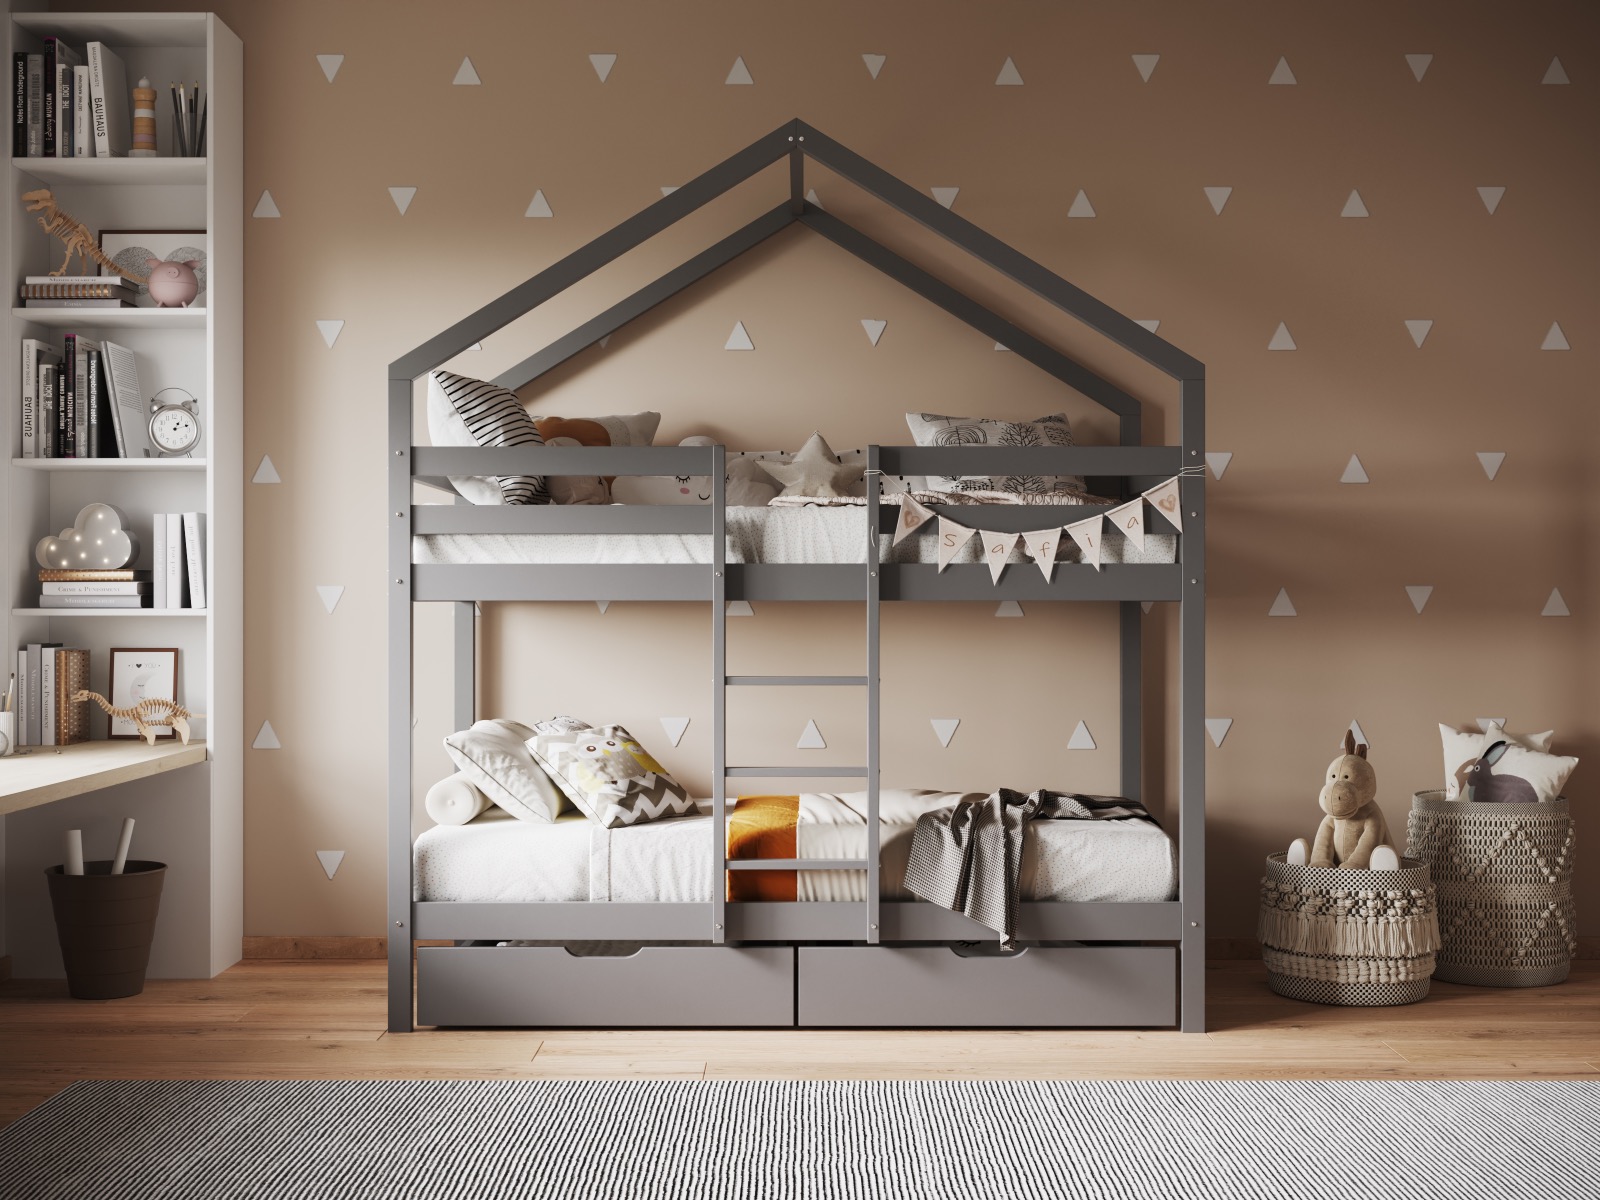 Flair Nest House Bunk Bed with Optional Storage Grey